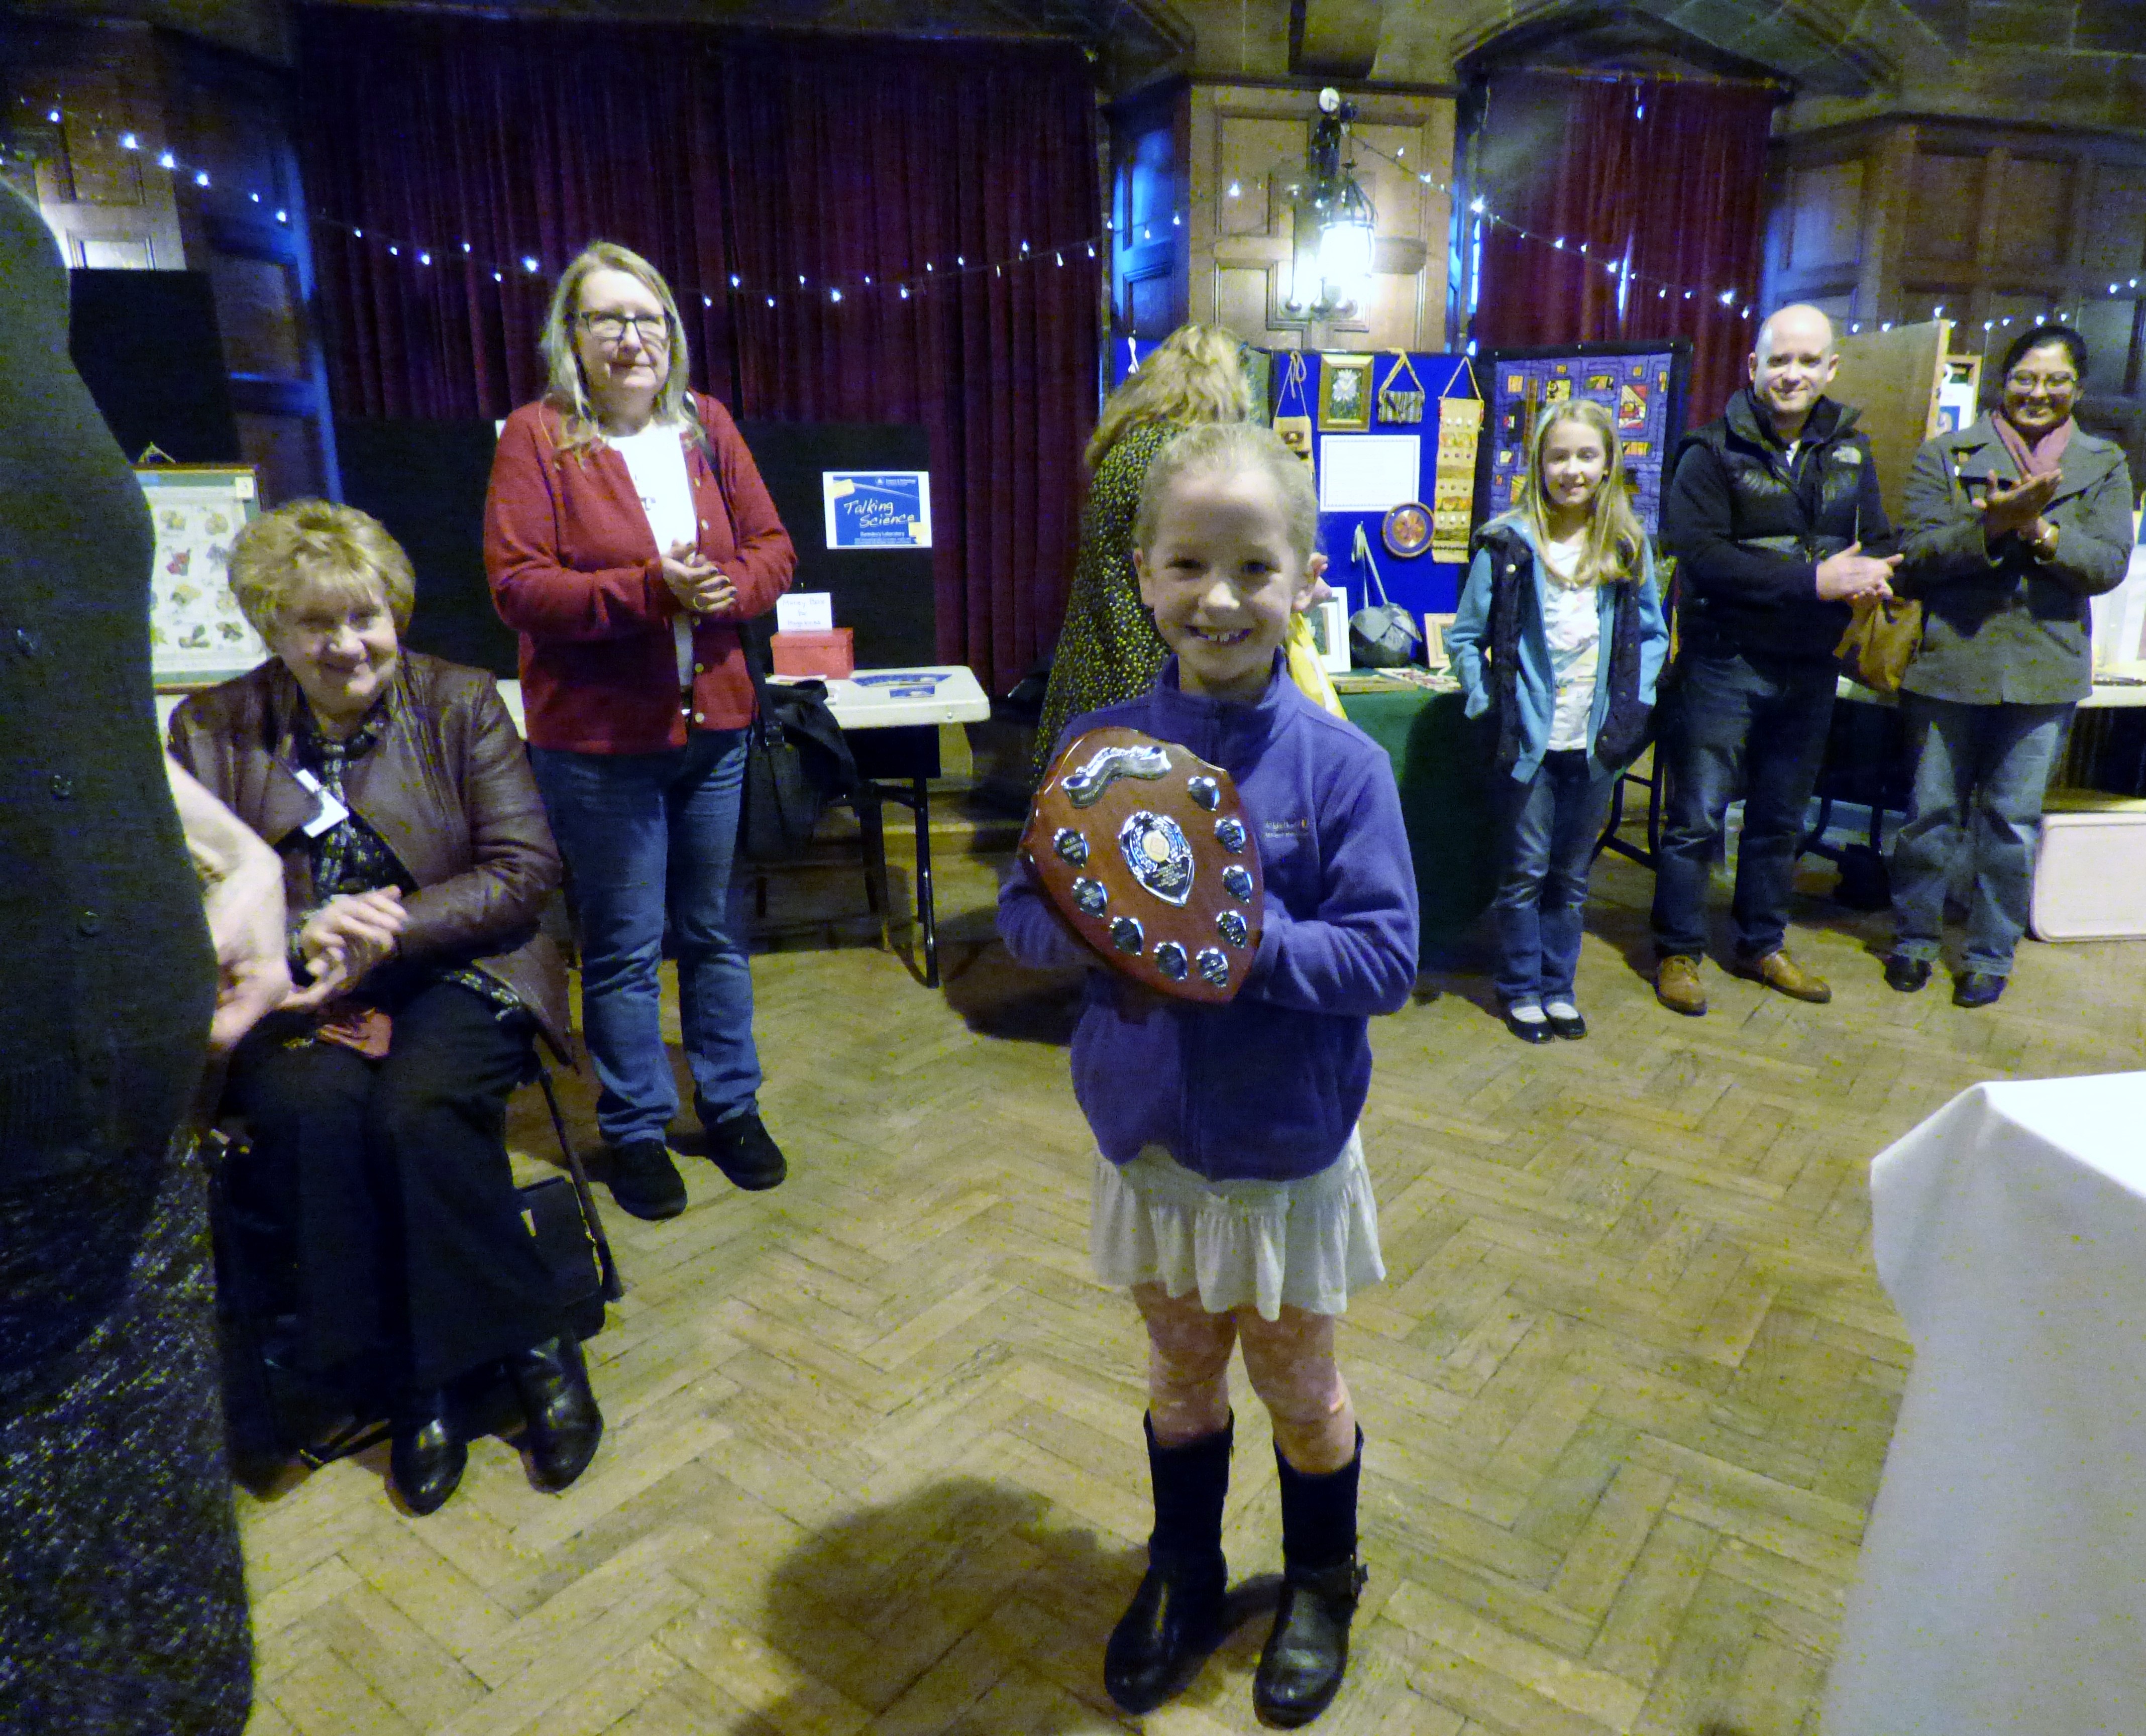 Zoe Lewis won the Sreepur Shield and Cup as Merseyside Young Embroiderer of the year 2016. She was not able to attend so her sisiter Esther accepted the Trophy at MEG Winter Fair 2016